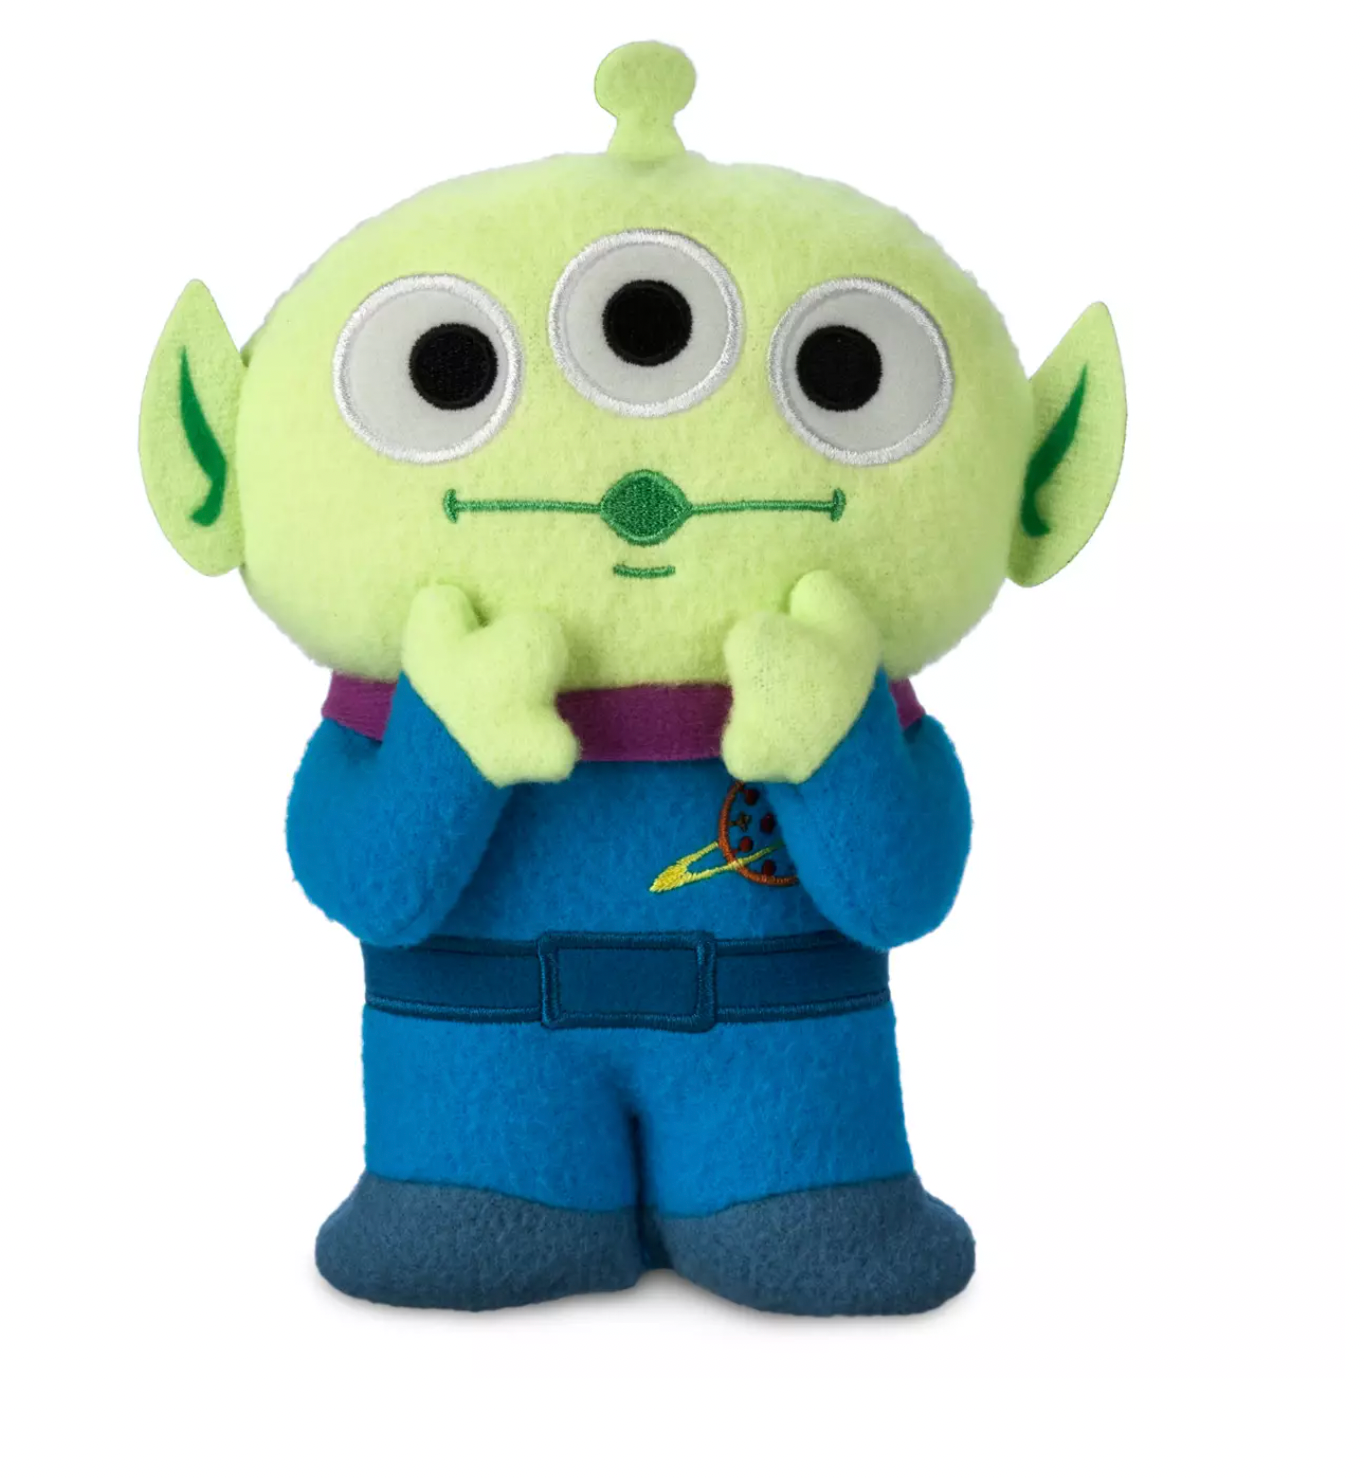 Disney Parks VHS Series 2 Toy Story Alien Plush Small 8'' New Limited